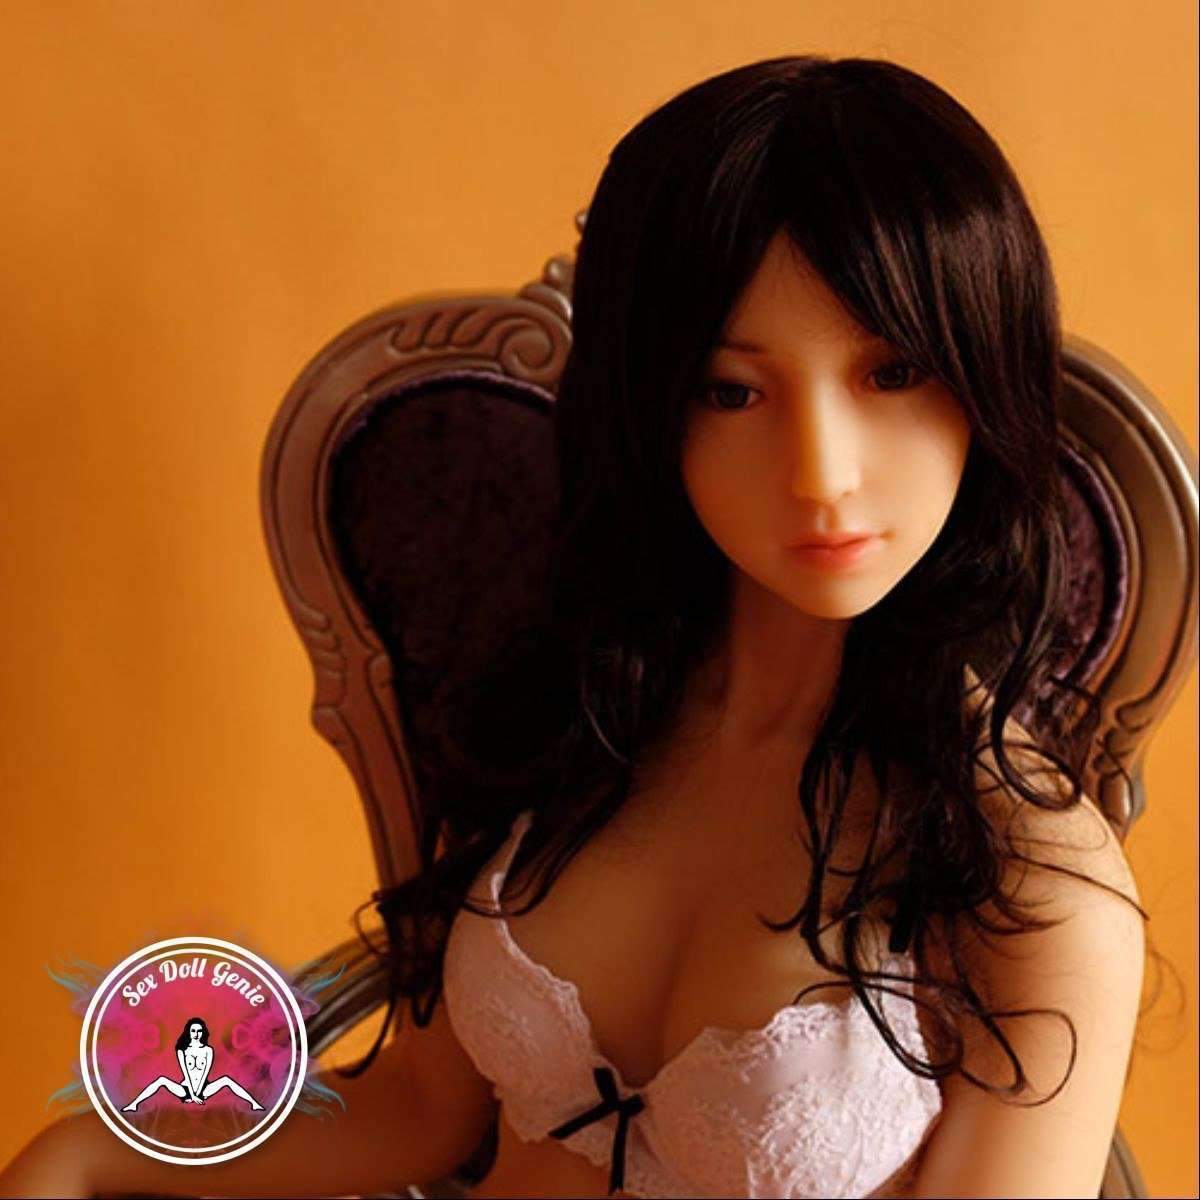 DS Doll - 158cm - Alisa Head - Type 1 D Cup Silicone Doll-3